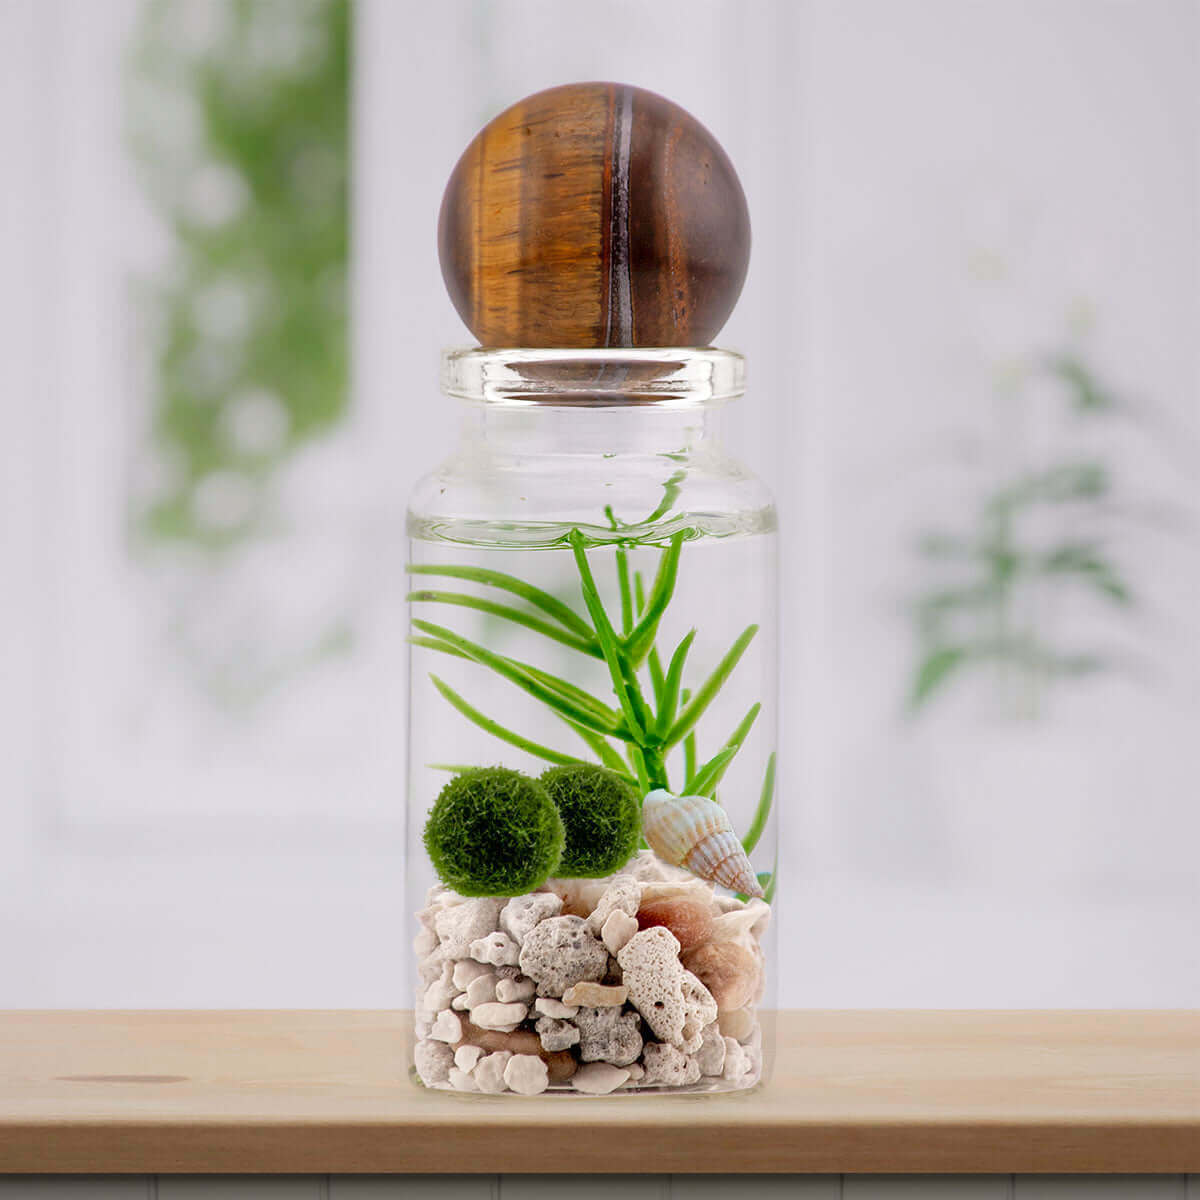 Tiger Eye sphere on moss ball terrarium, its bands gleaming with earthy tones.